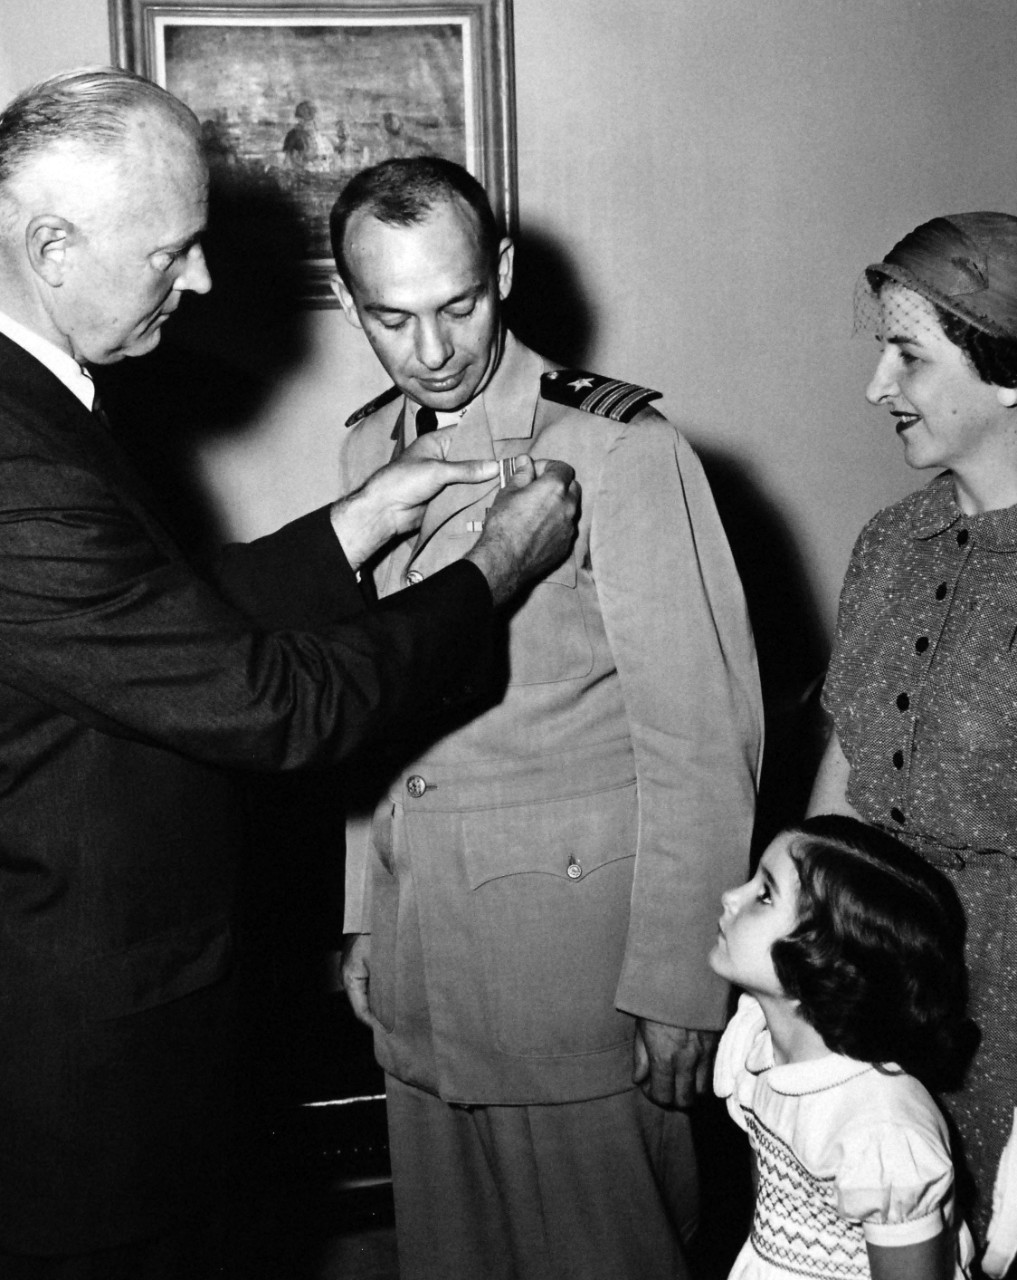 USN 710503:   Naval Balloonist Commander Ross Receives Distinguished Flying Cross.    Commander Malcolm D. Ross, USNR, Naval Balloon Pilot, receives the Distinguished Flying Cross from James H. Wakelin, Assistant Secretary of the Navy for Research and Development.  Mrs. Ross, the Commander’s wife and daughter, Jane, witnessed the 25 August 1959 ceremony.  The citation was awarded “for extraordinary achievement in aerial flight as command pilot of a two-man Navy balloon and gondola during a daring and hazardous ascent into the upper stratosphere on July 26-27, 1958.  In addition to setting a new unofficial world endurance record for sustained flight into the stratosphere of thirty-four hours and thirty-nine minutes, he also successfully completed approximately twenty-seven other scientific experiments conducted aloft as a scheduled part of the flight, attracting widespread public attention and acclaim.  By his outstanding professional skills, courage, and inspiring efforts, Commander Ross made a highly significant contribution to man’s scientific conquest of space.”  Official U.S. Navy photograph, now in the collections of the National Archives.     